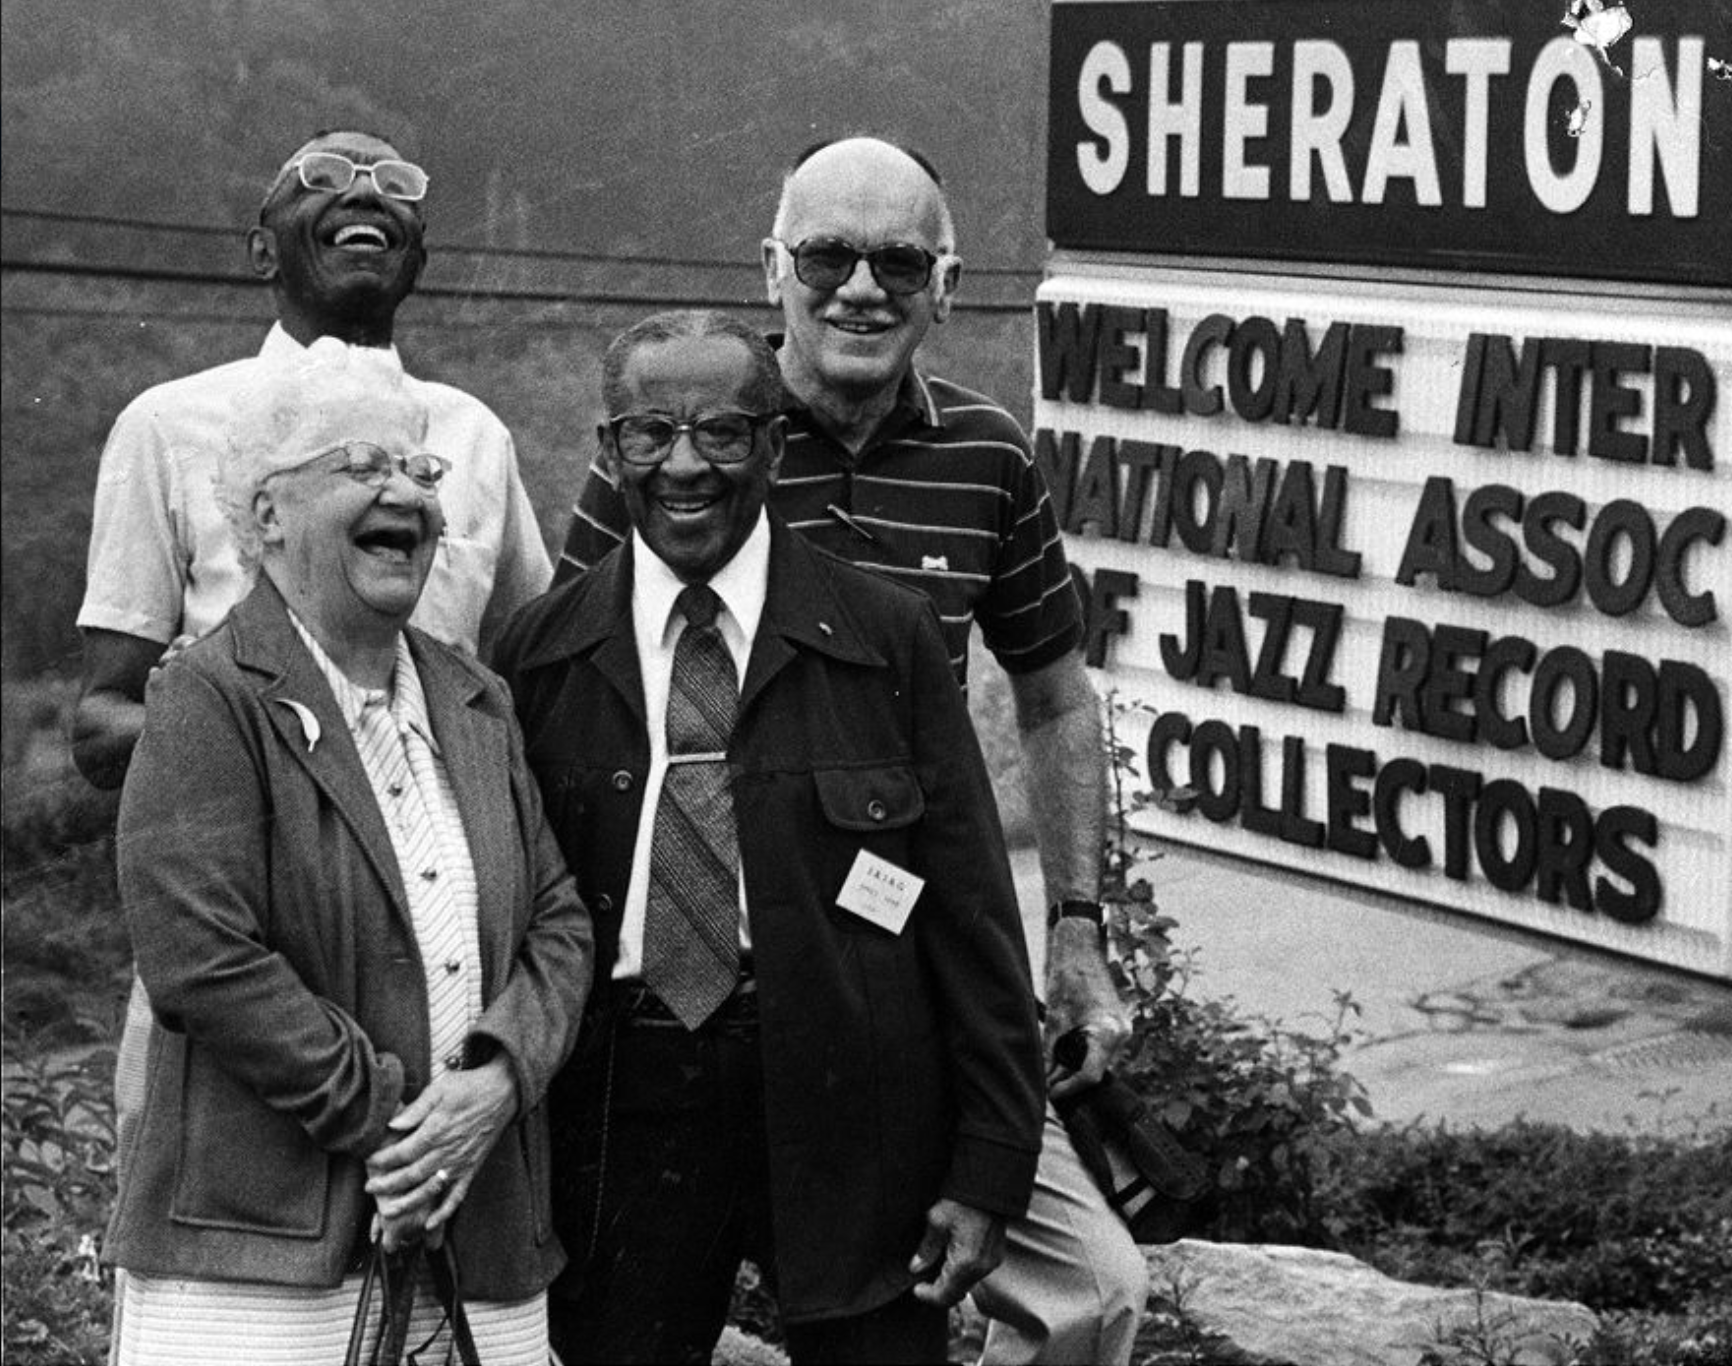 Four people stand next to a sign outside that is welcoming a jazz association.